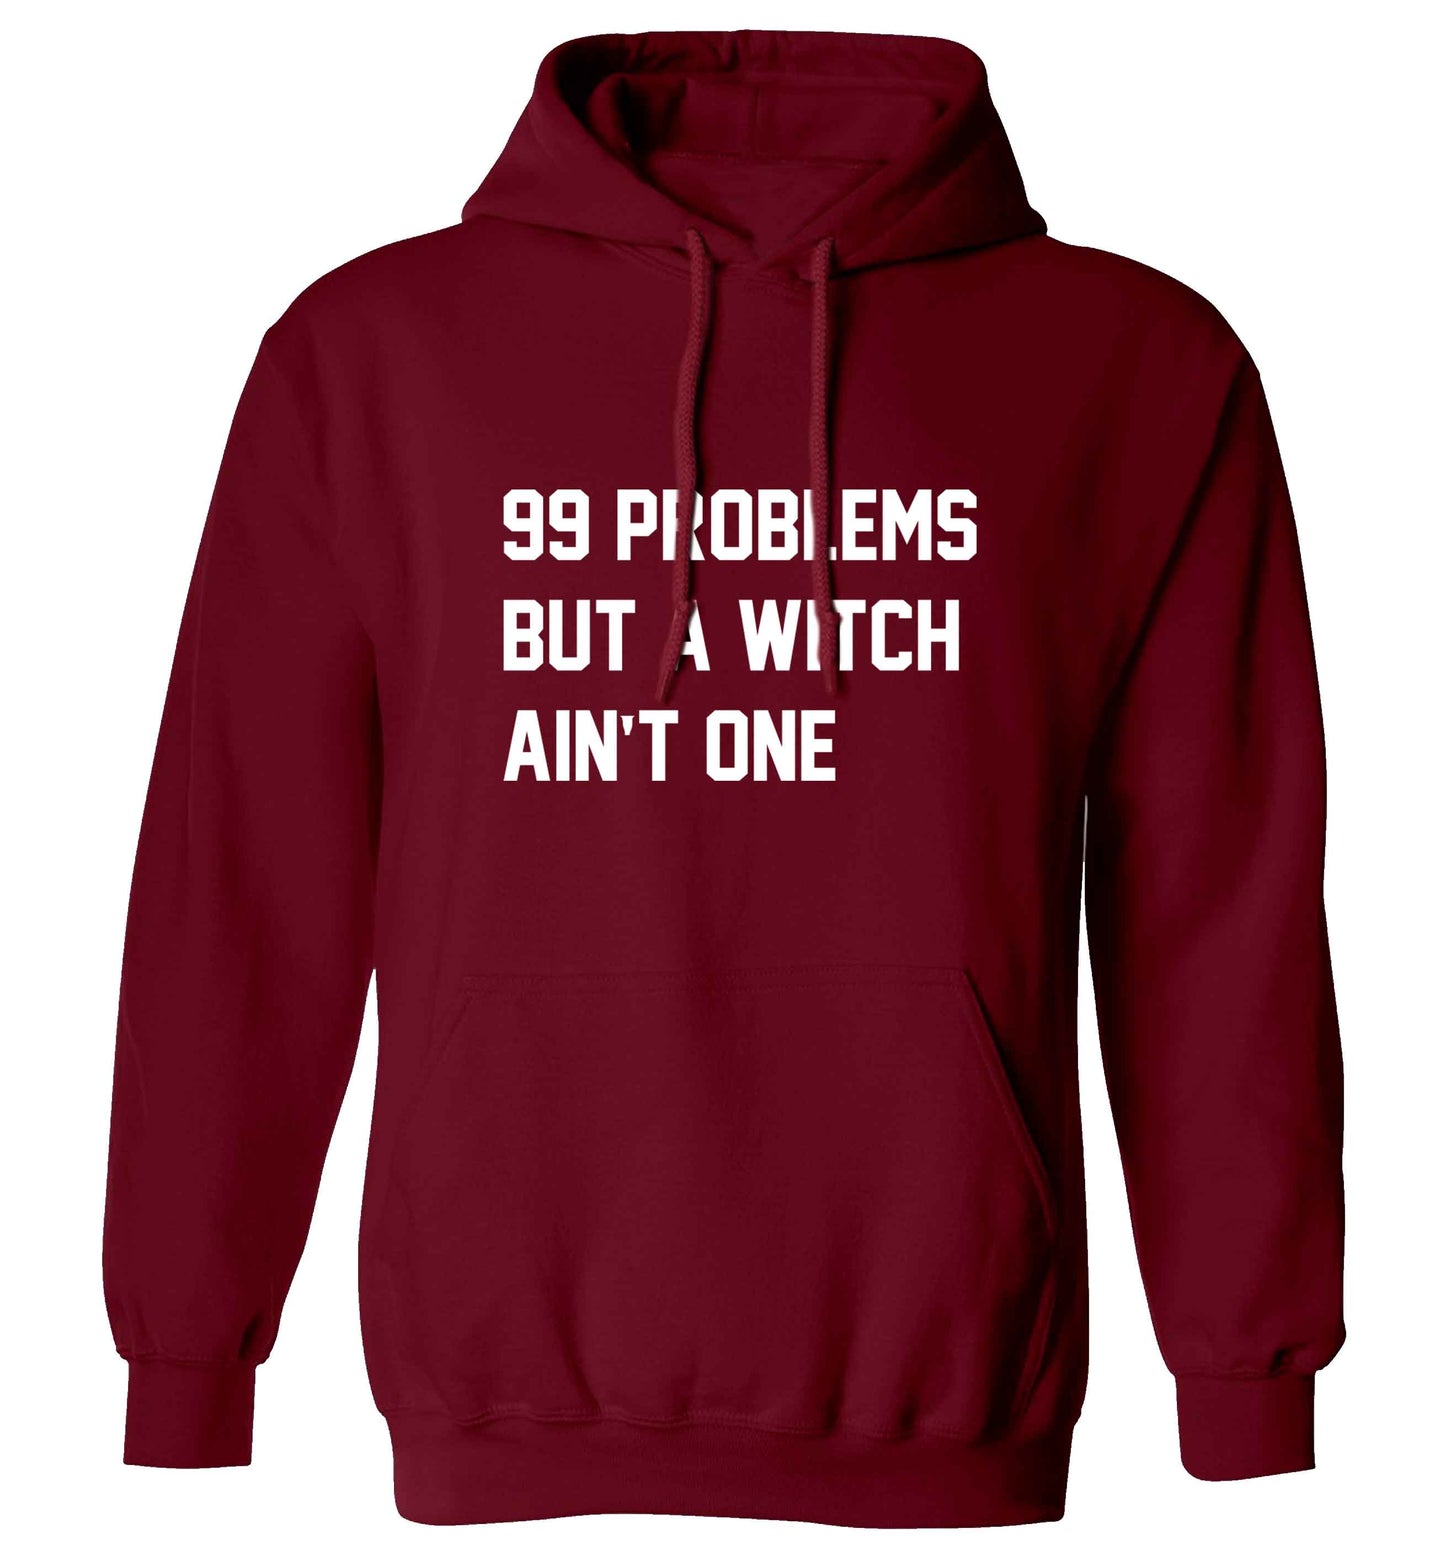 99 Problems but a witch aint one adults unisex maroon hoodie 2XL